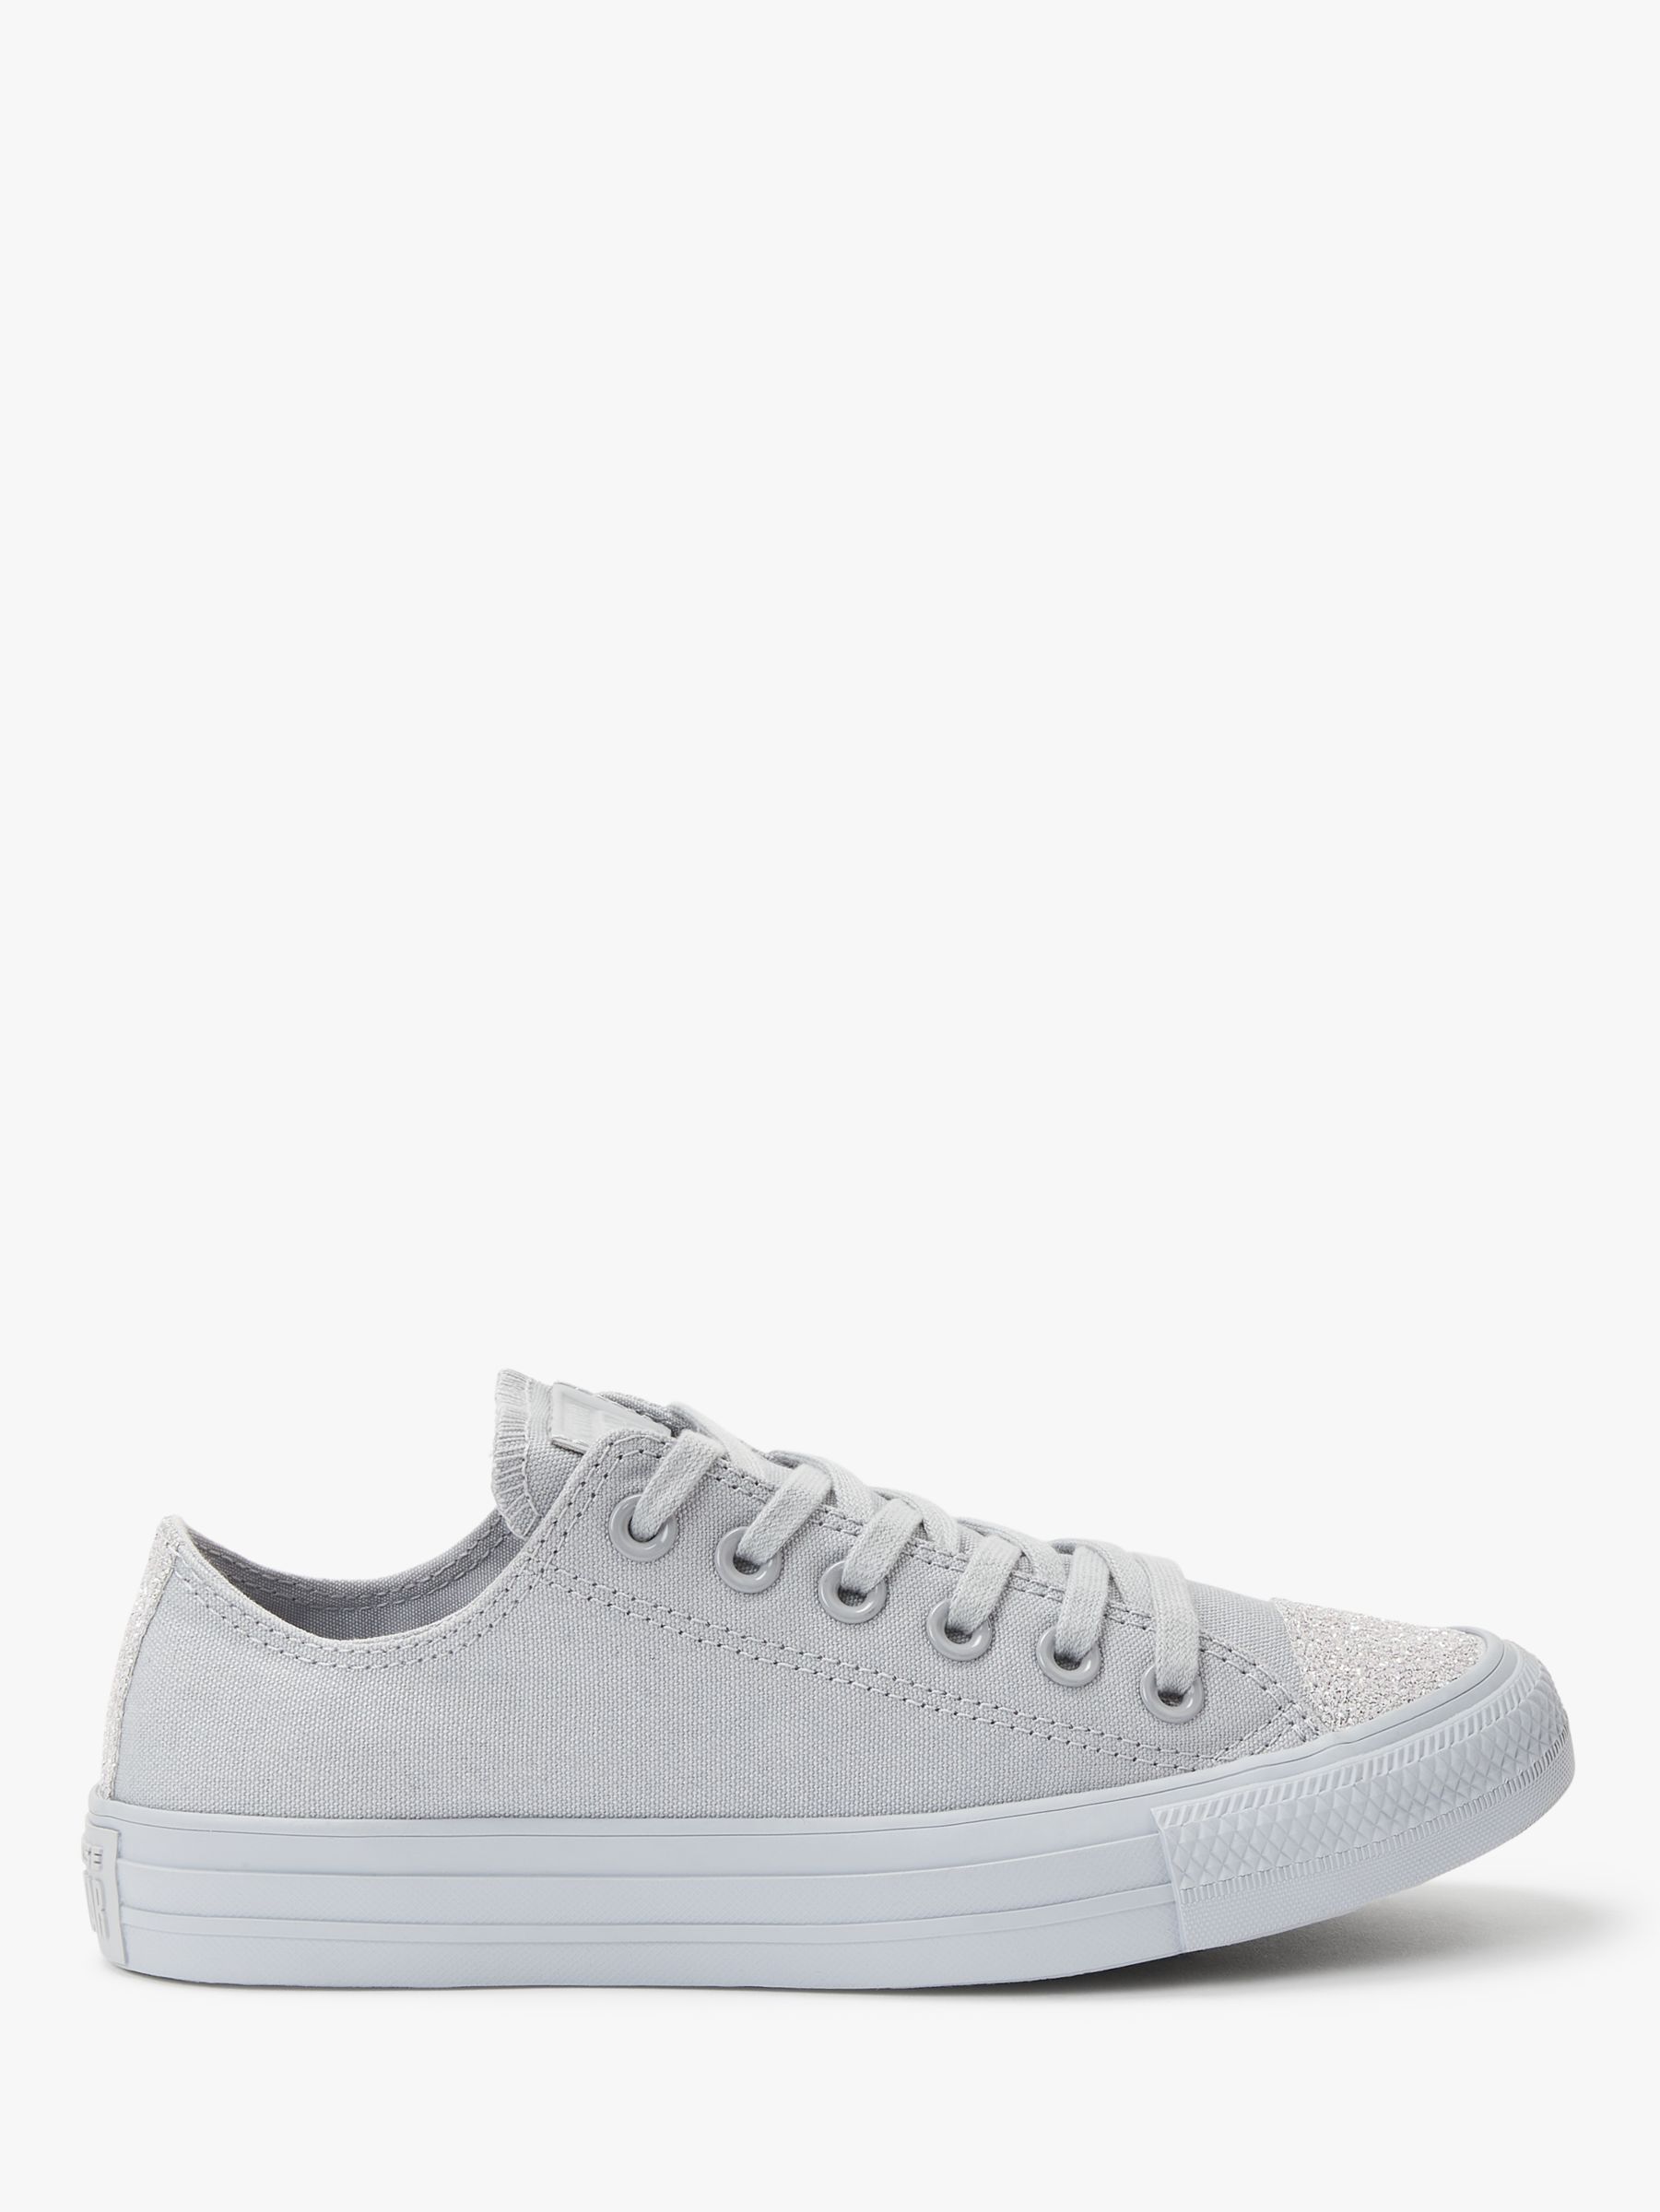 Converse Women's Chuck Taylor Glitter Trainers, Wolf Grey/Silver at John  Lewis \u0026 Partners